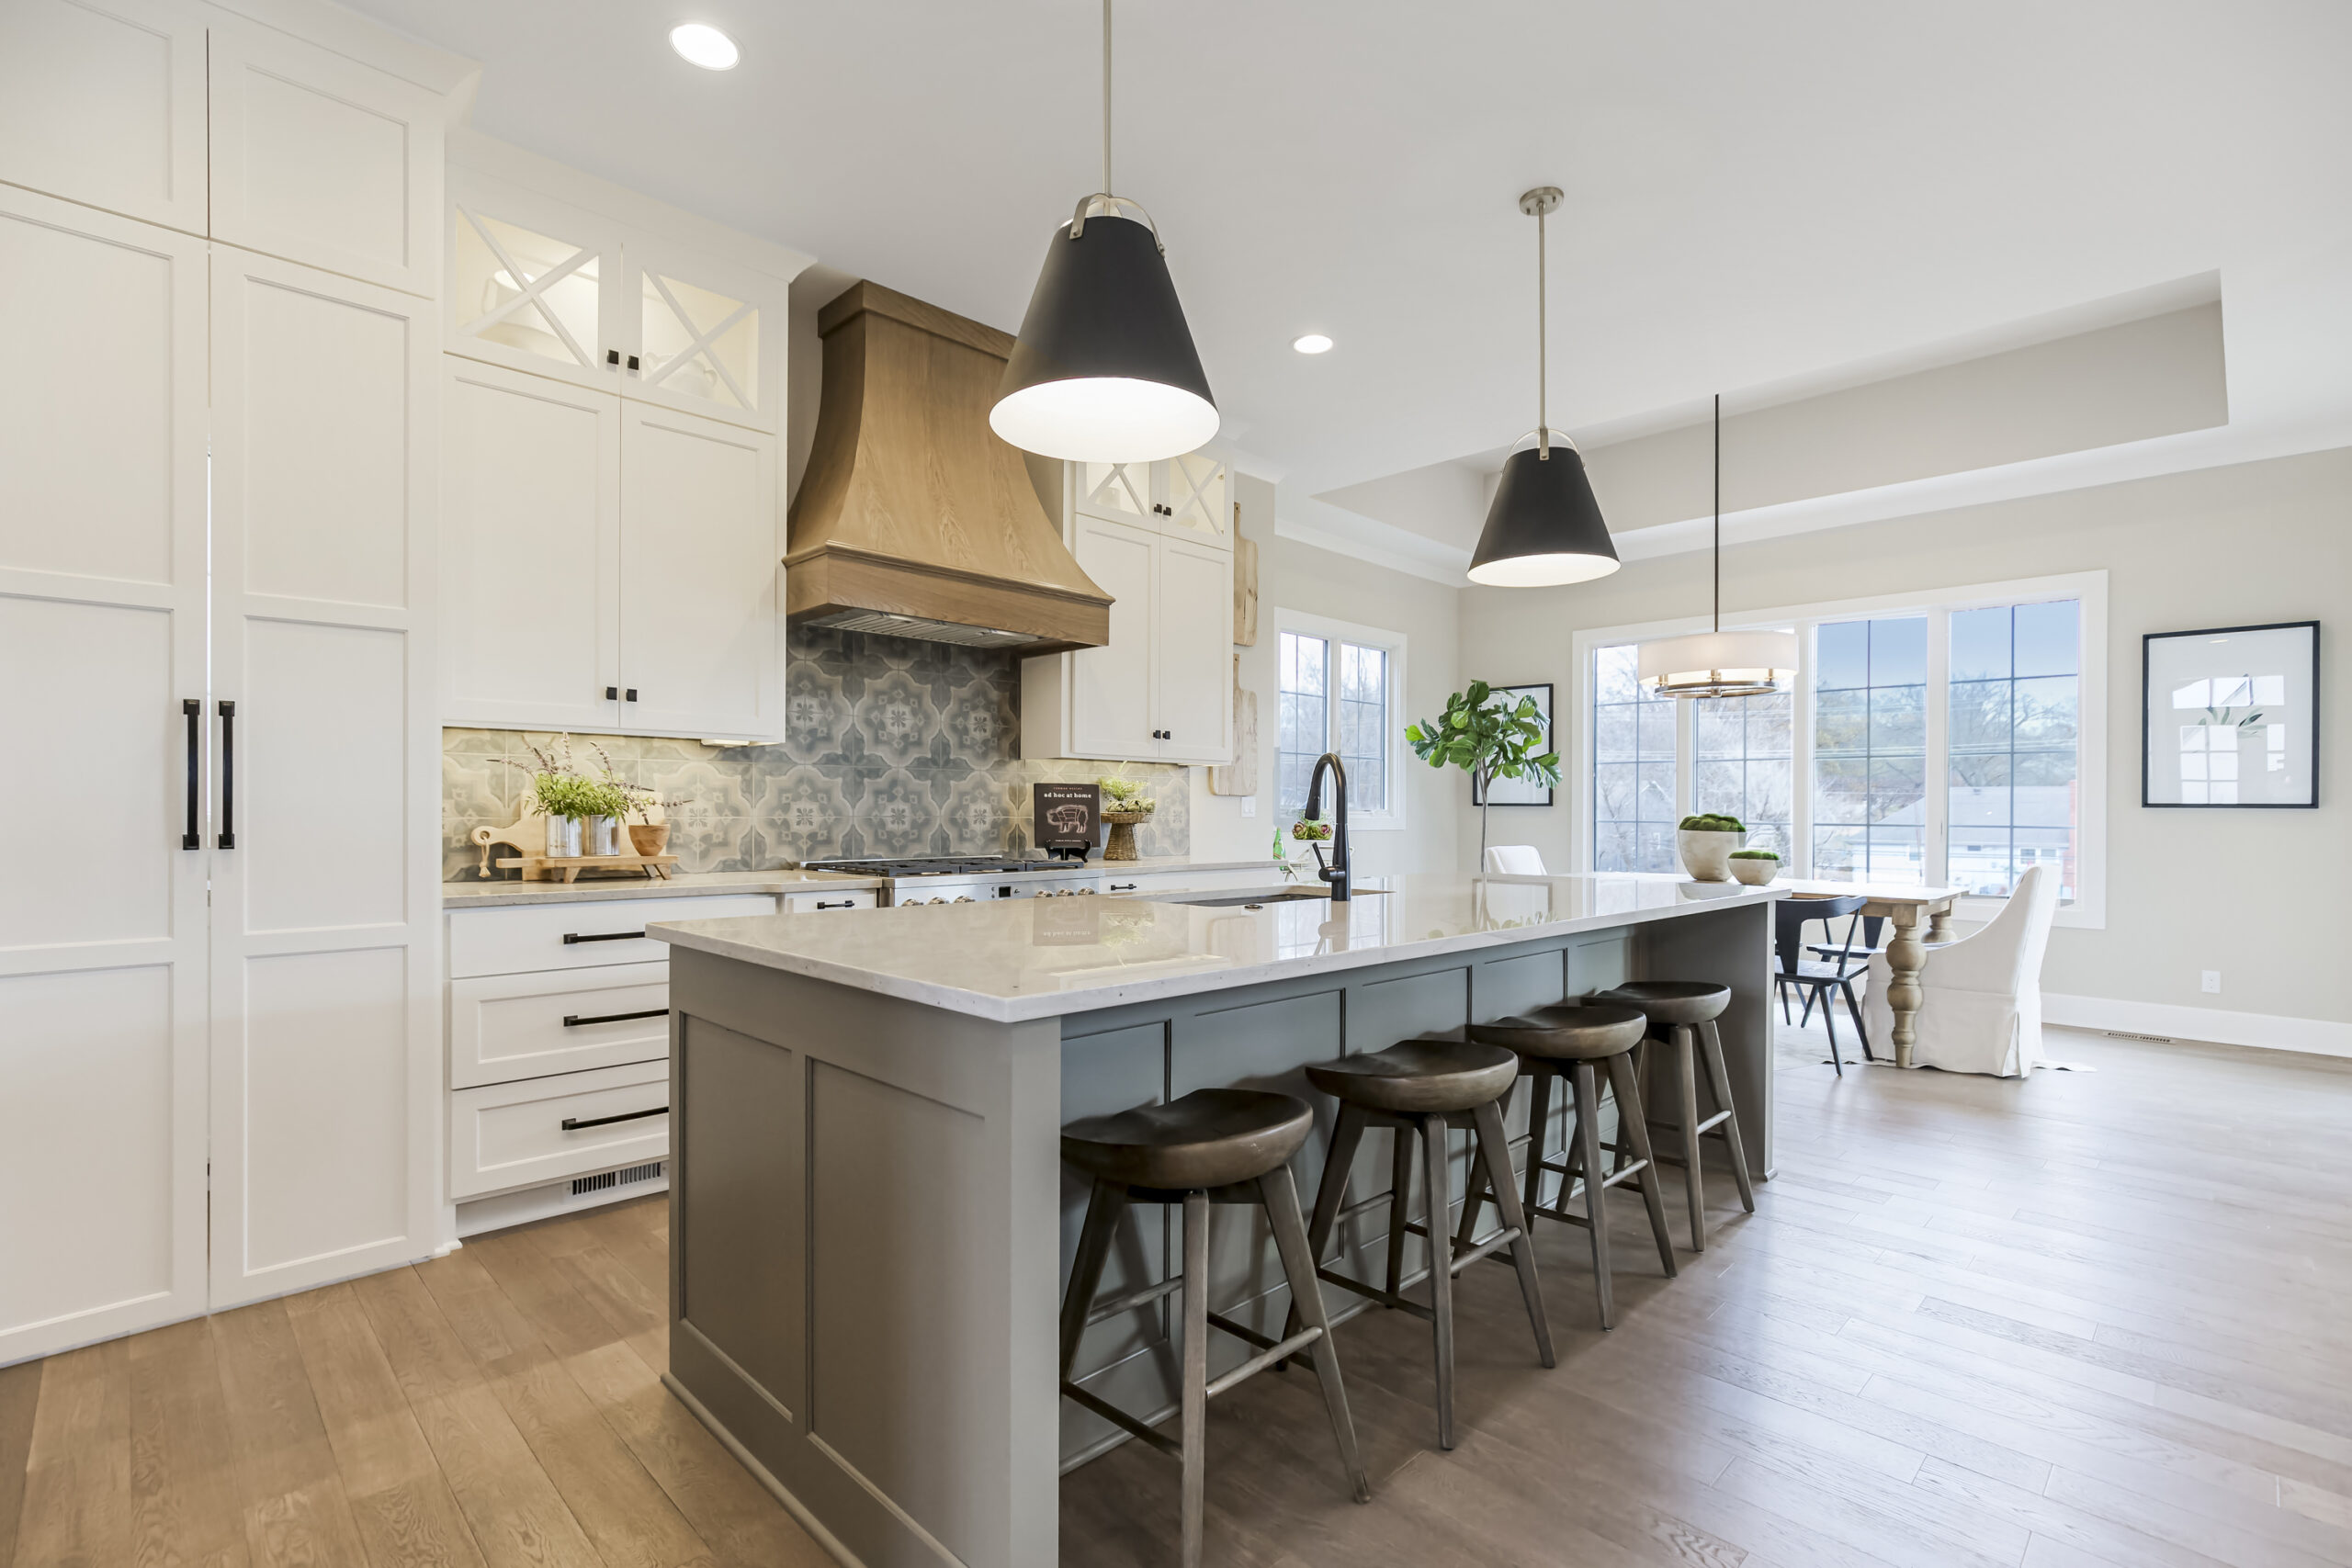 Kitchen with center island and white cabinets in a regents park home from Lambie homes